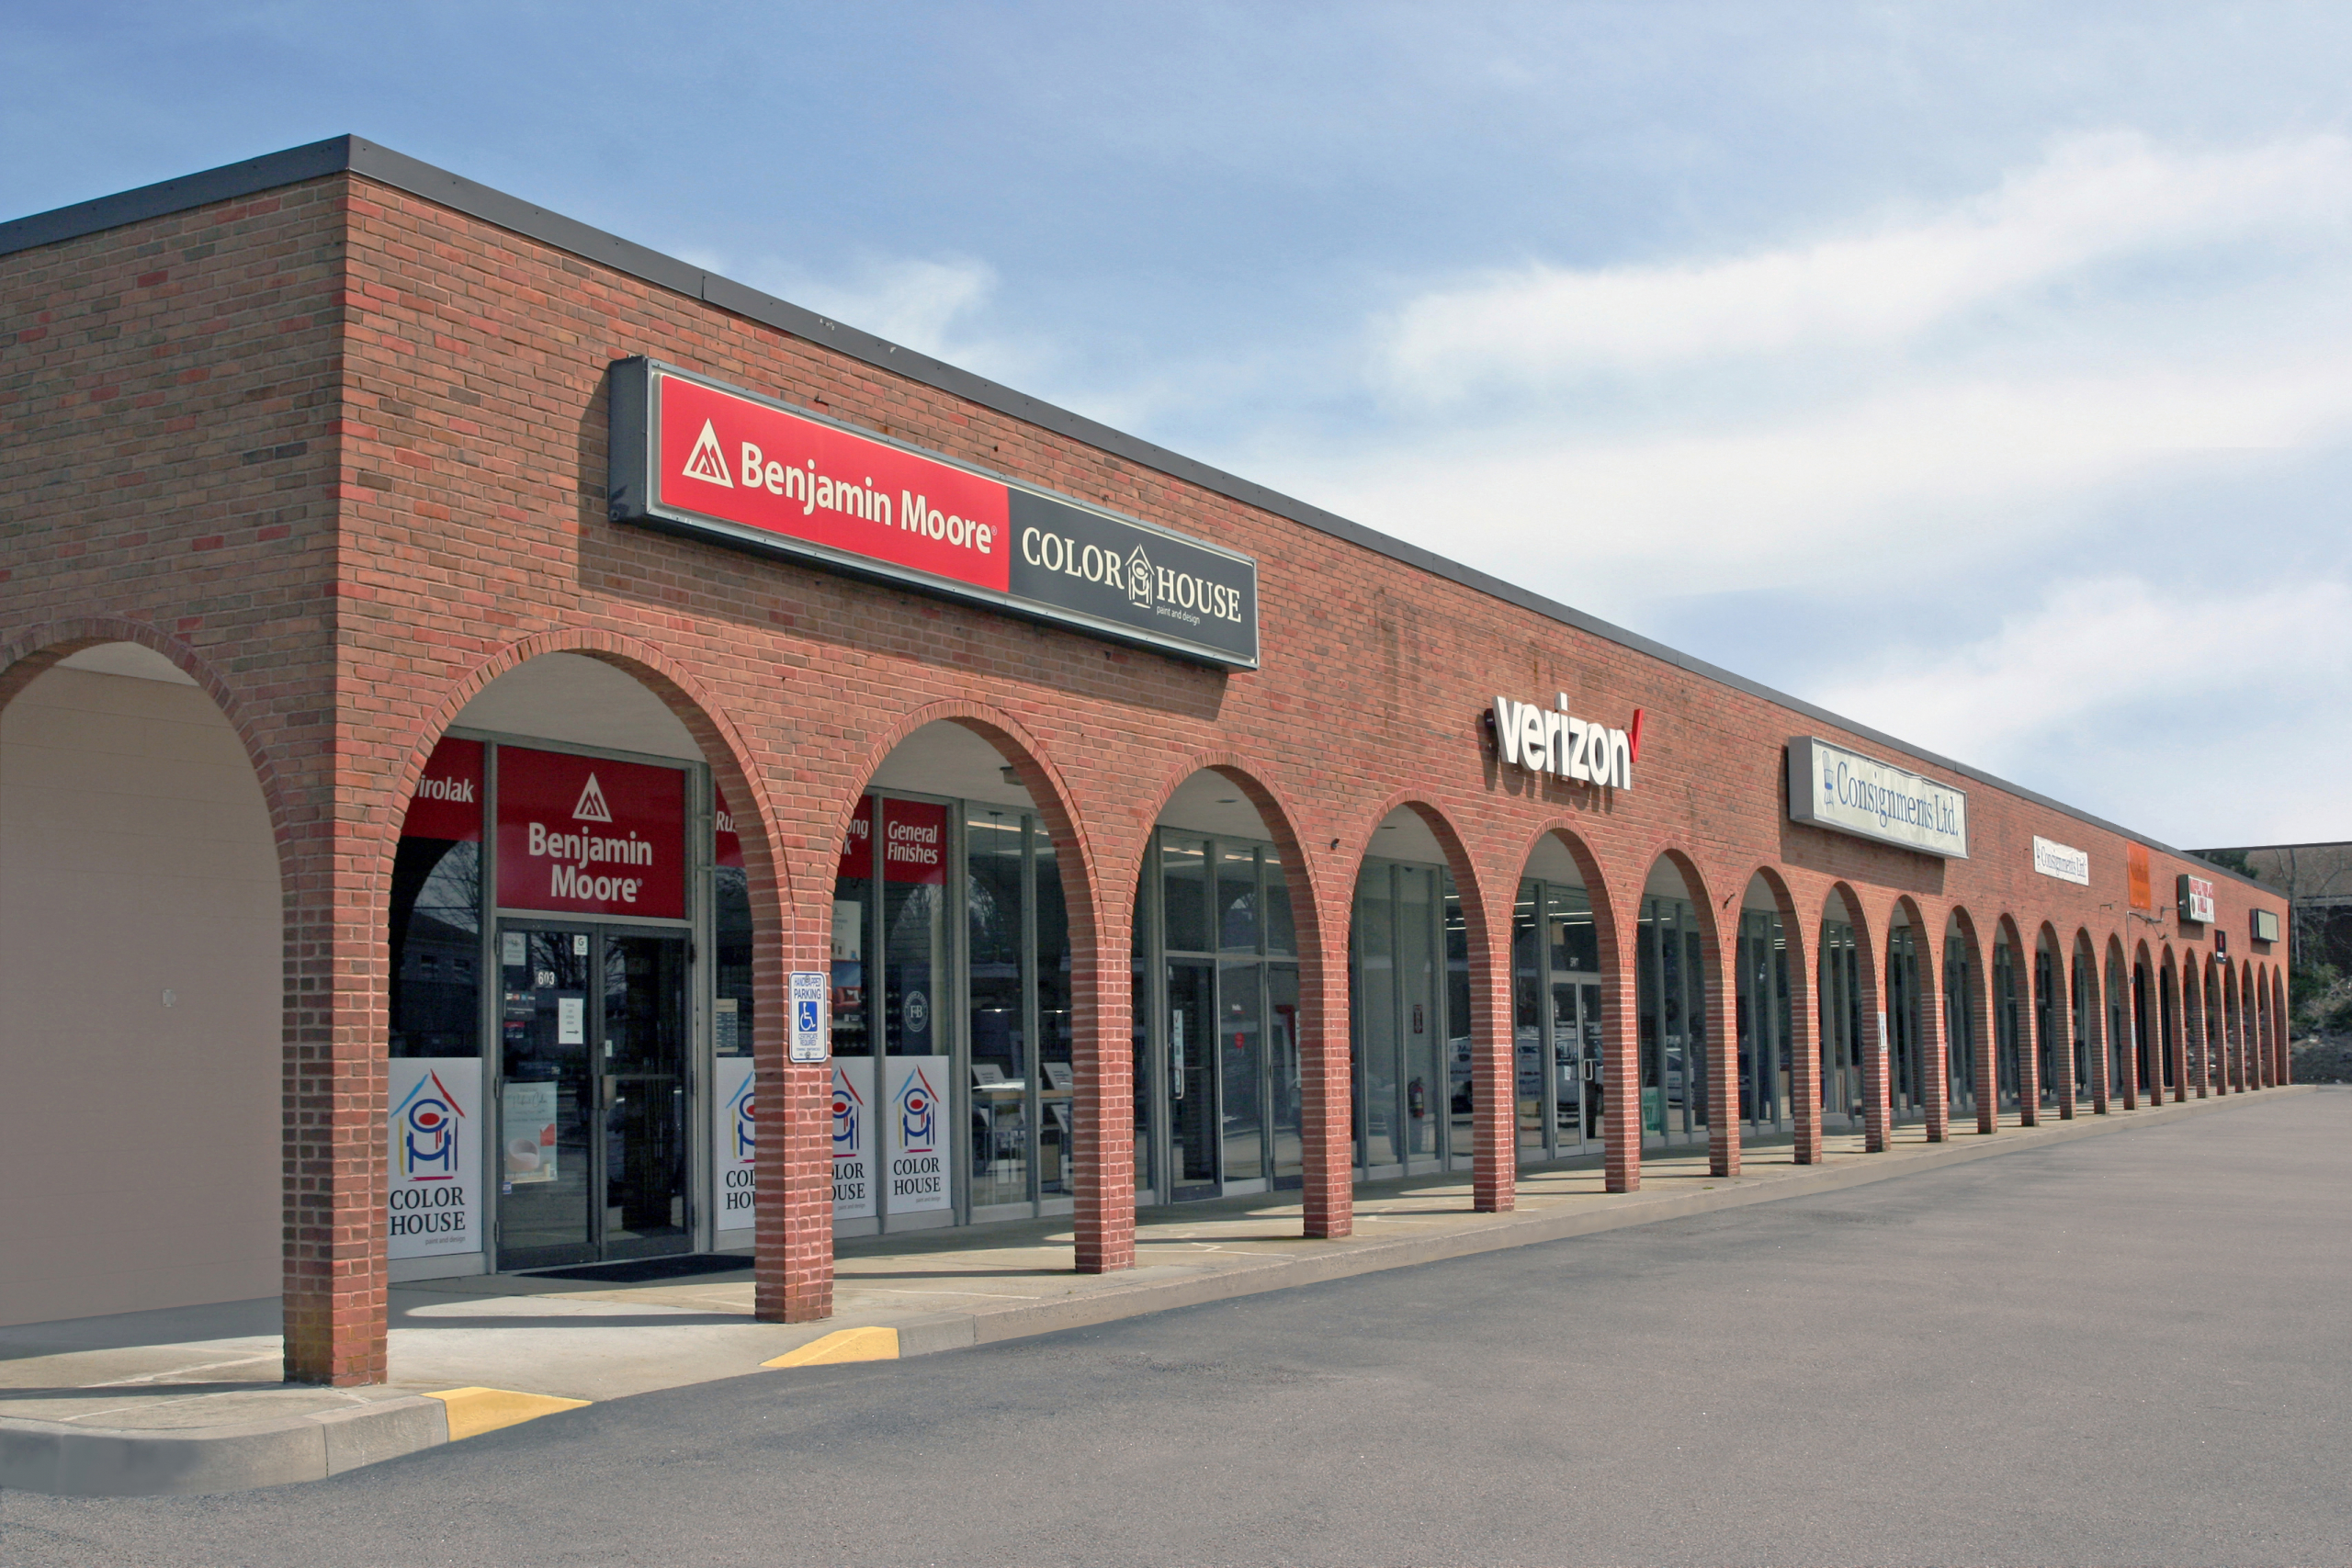 ARAKELIAN BROKERS THE SALE OF A SIGNIFICANT  SHOPPING CENTER IN WAKEFIELD, RI